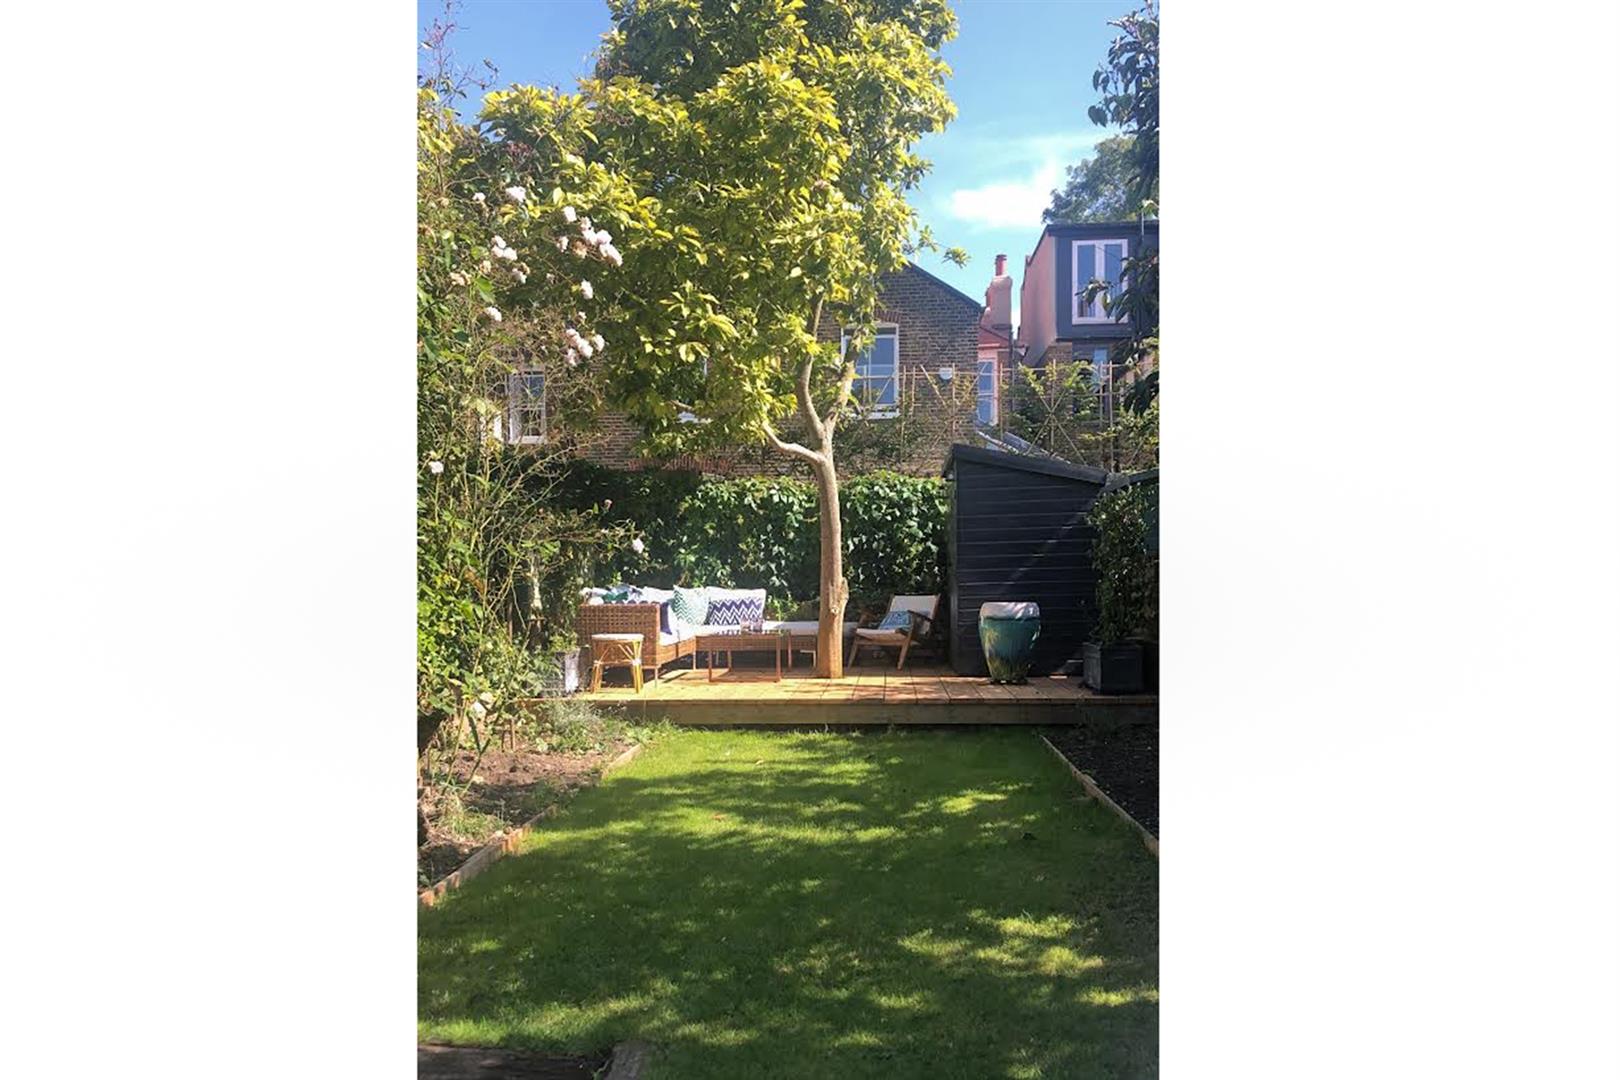 House - Semi-Detached For Sale in Bicknell Road, Herne Hill, SE5 887 view27